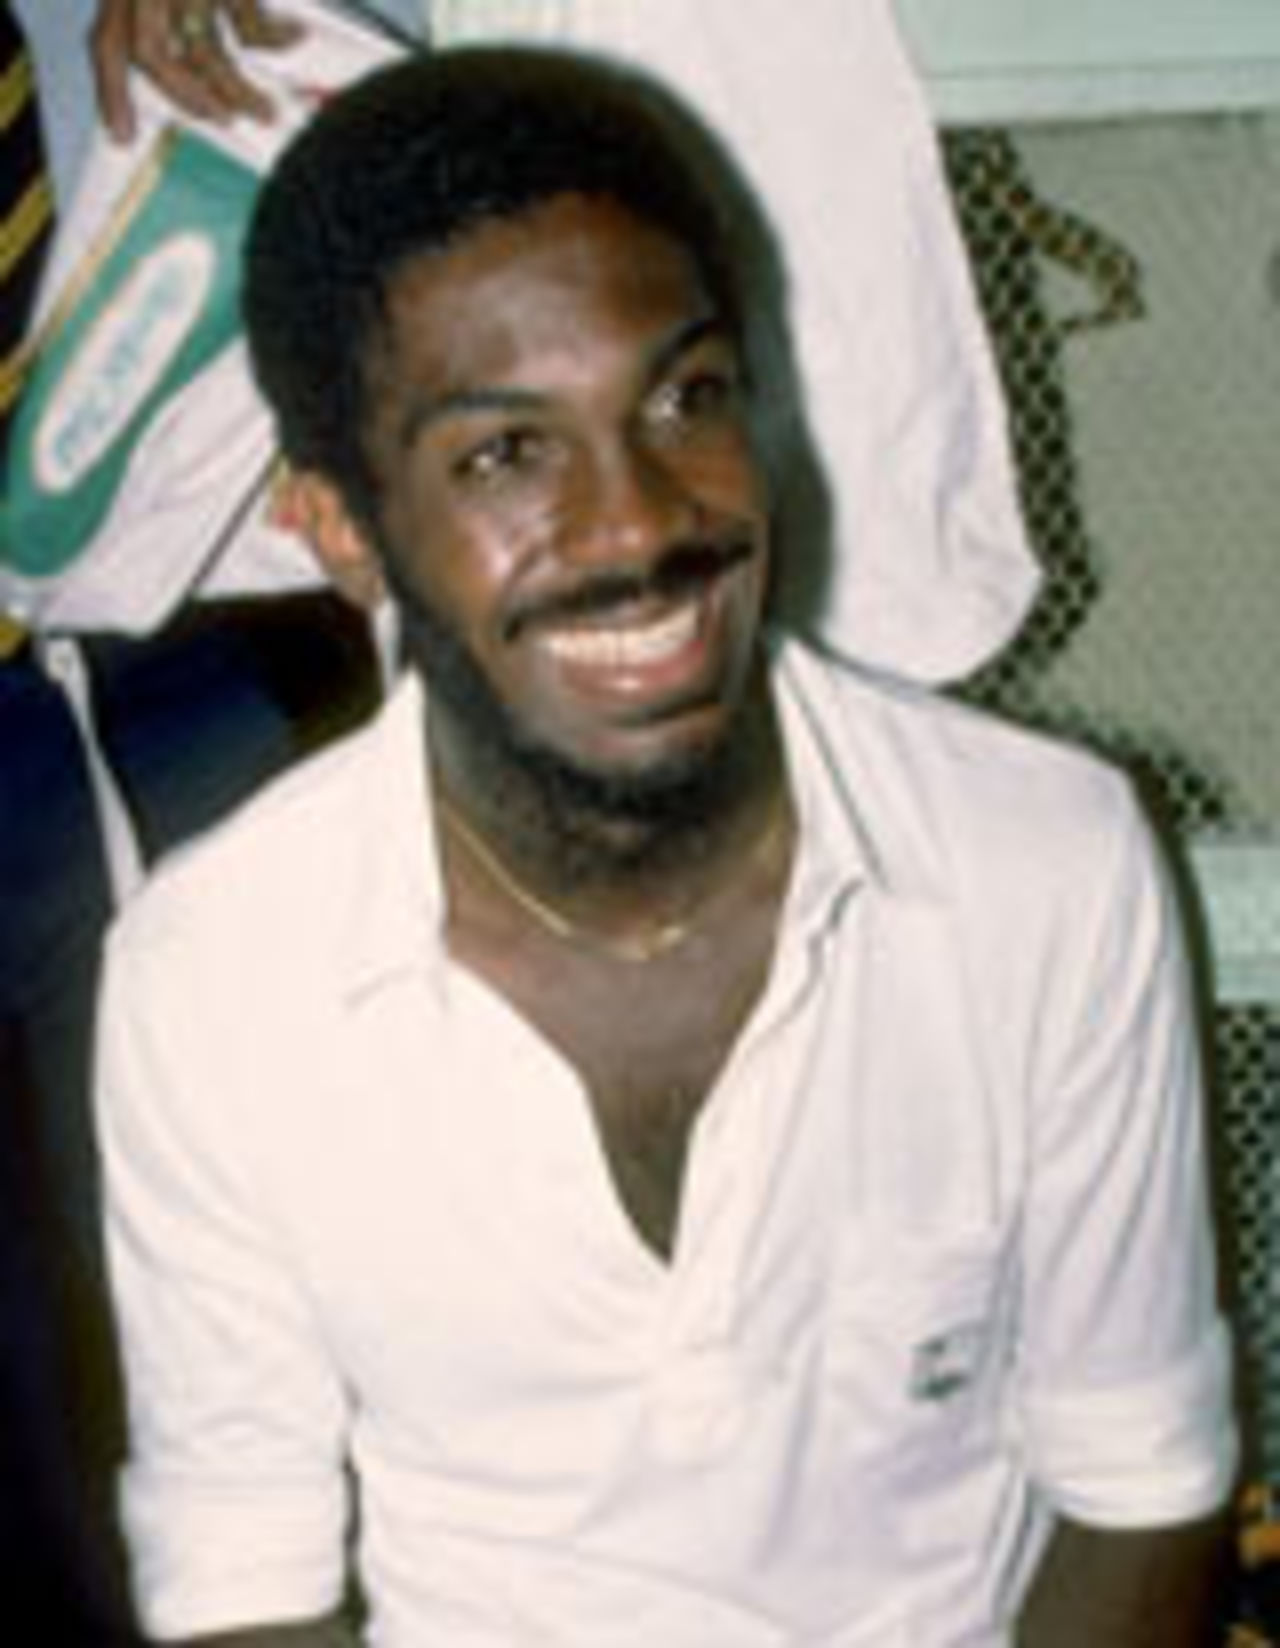 Michael Holding profile, smiling